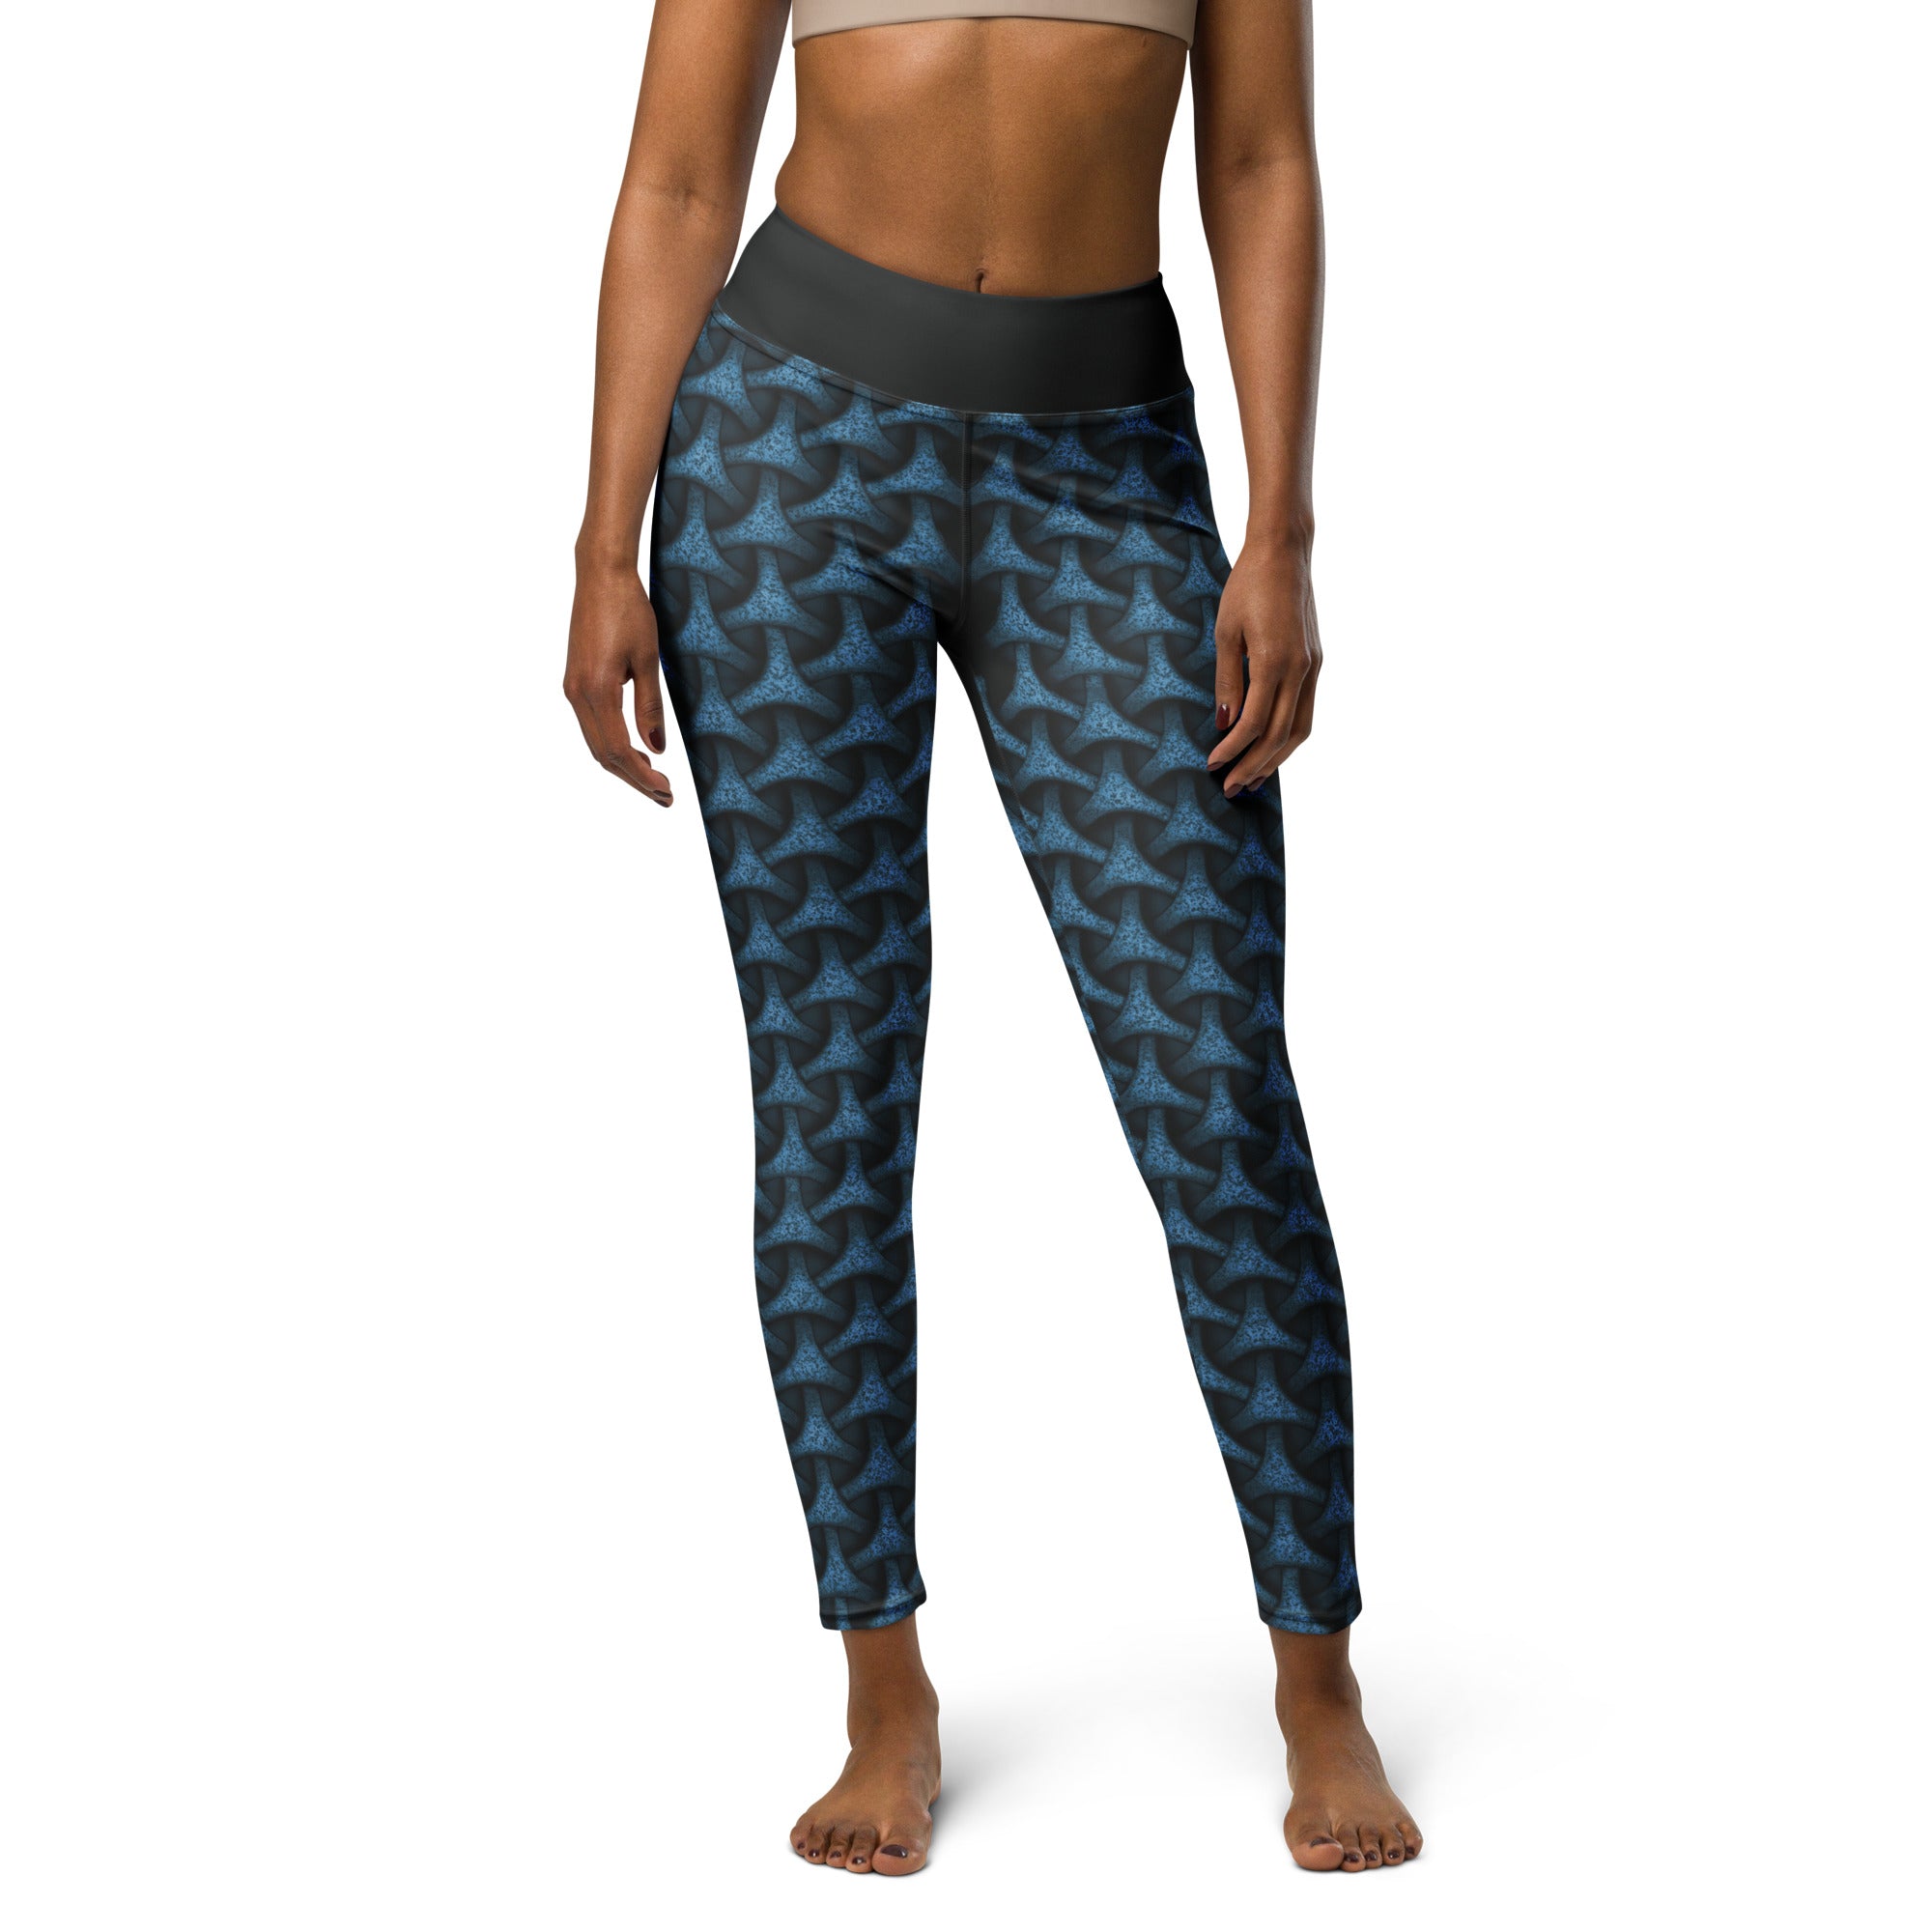 Combining comfort and style with Starlight Serenade Tristar Leggings during a stretch.